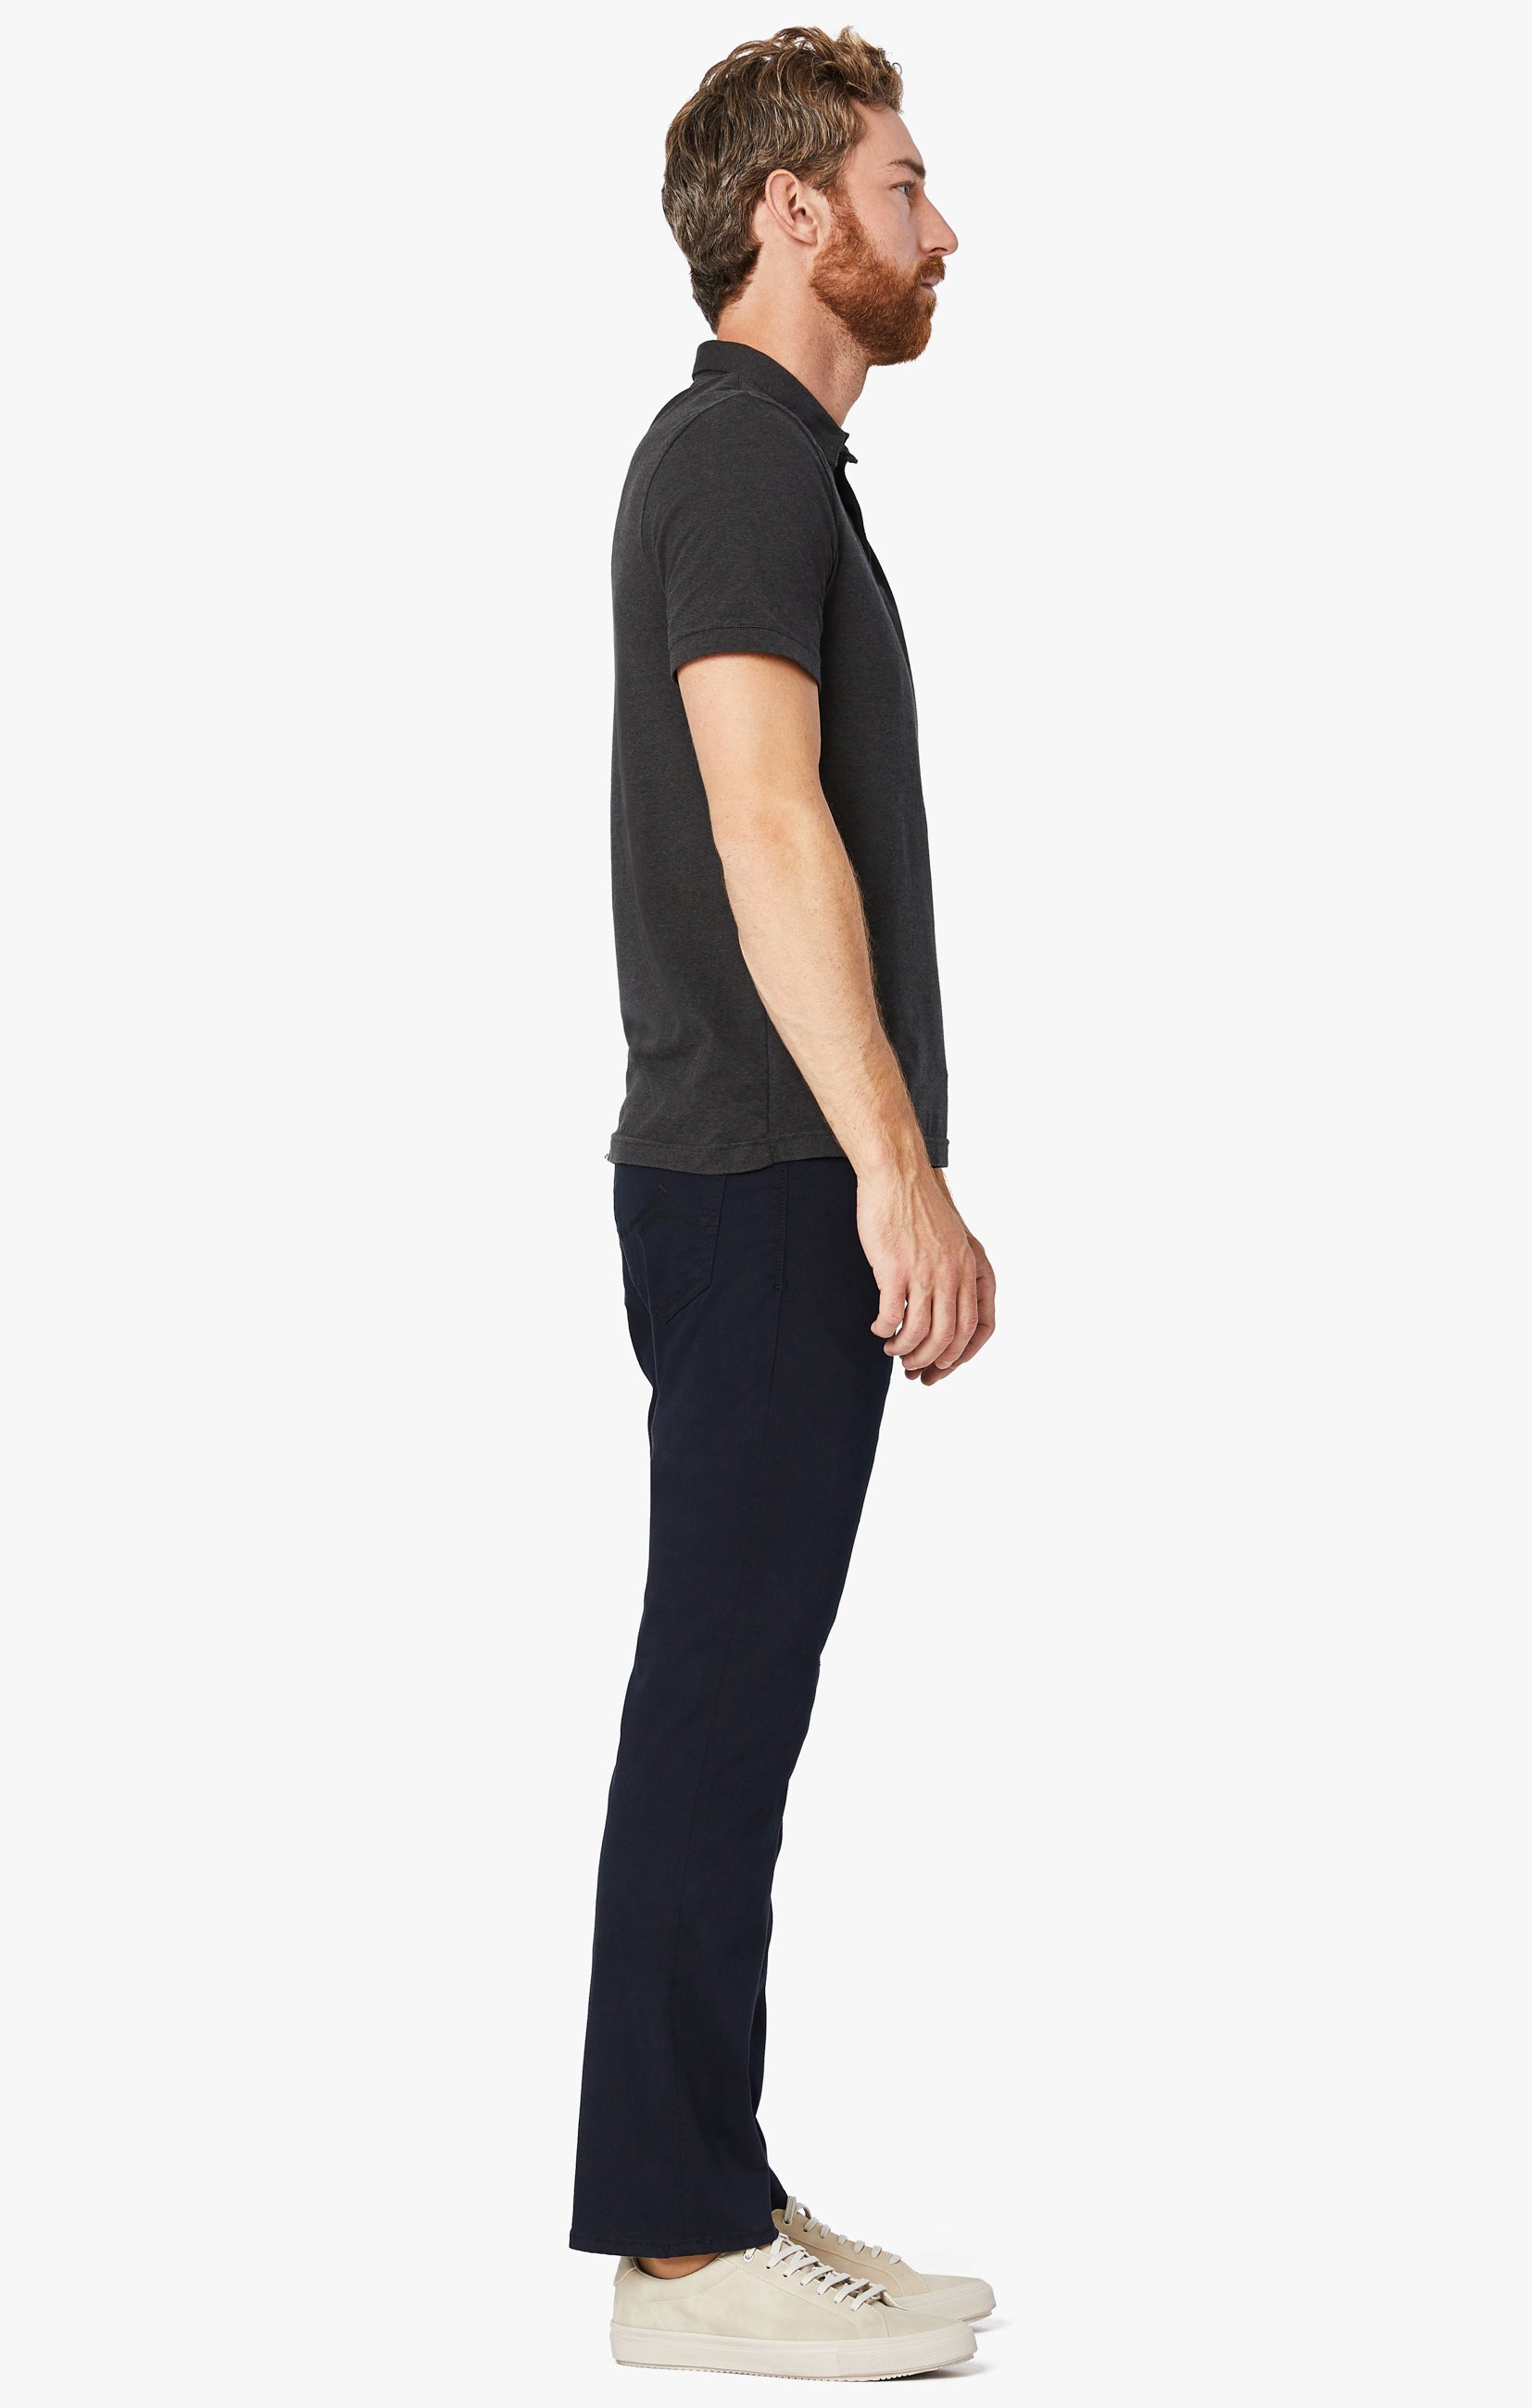 Charisma Classic Fit Pants in Navy Twill Image 4